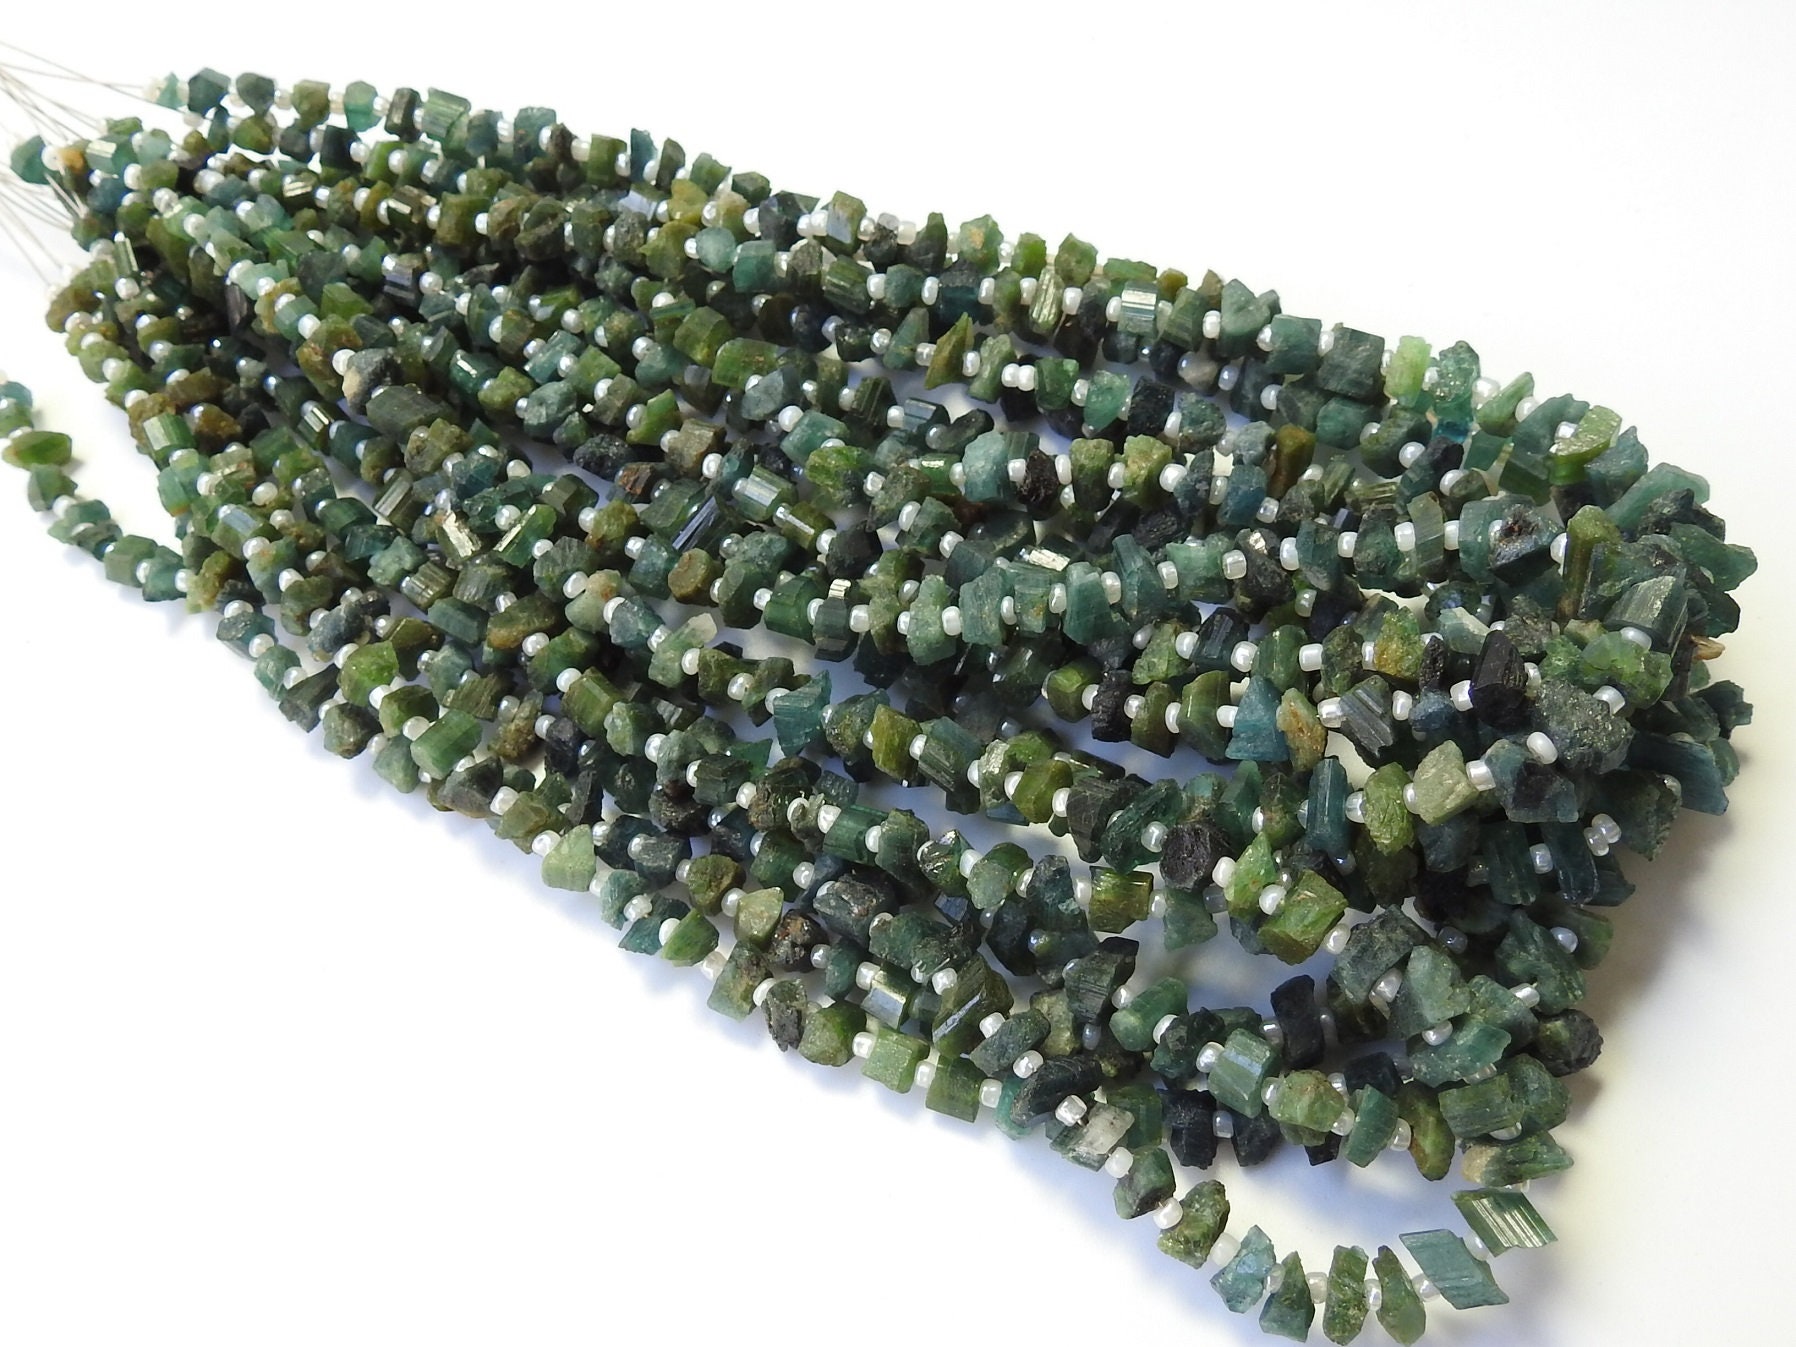 Green Tourmaline Natural Crystal Rough Beads,Chips,Uncut,Nuggets,Anklets,14Inchs Strand 6X3To4X3MM Approx,Wholesaler,Supplies,RB2 | Save 33% - Rajasthan Living 18